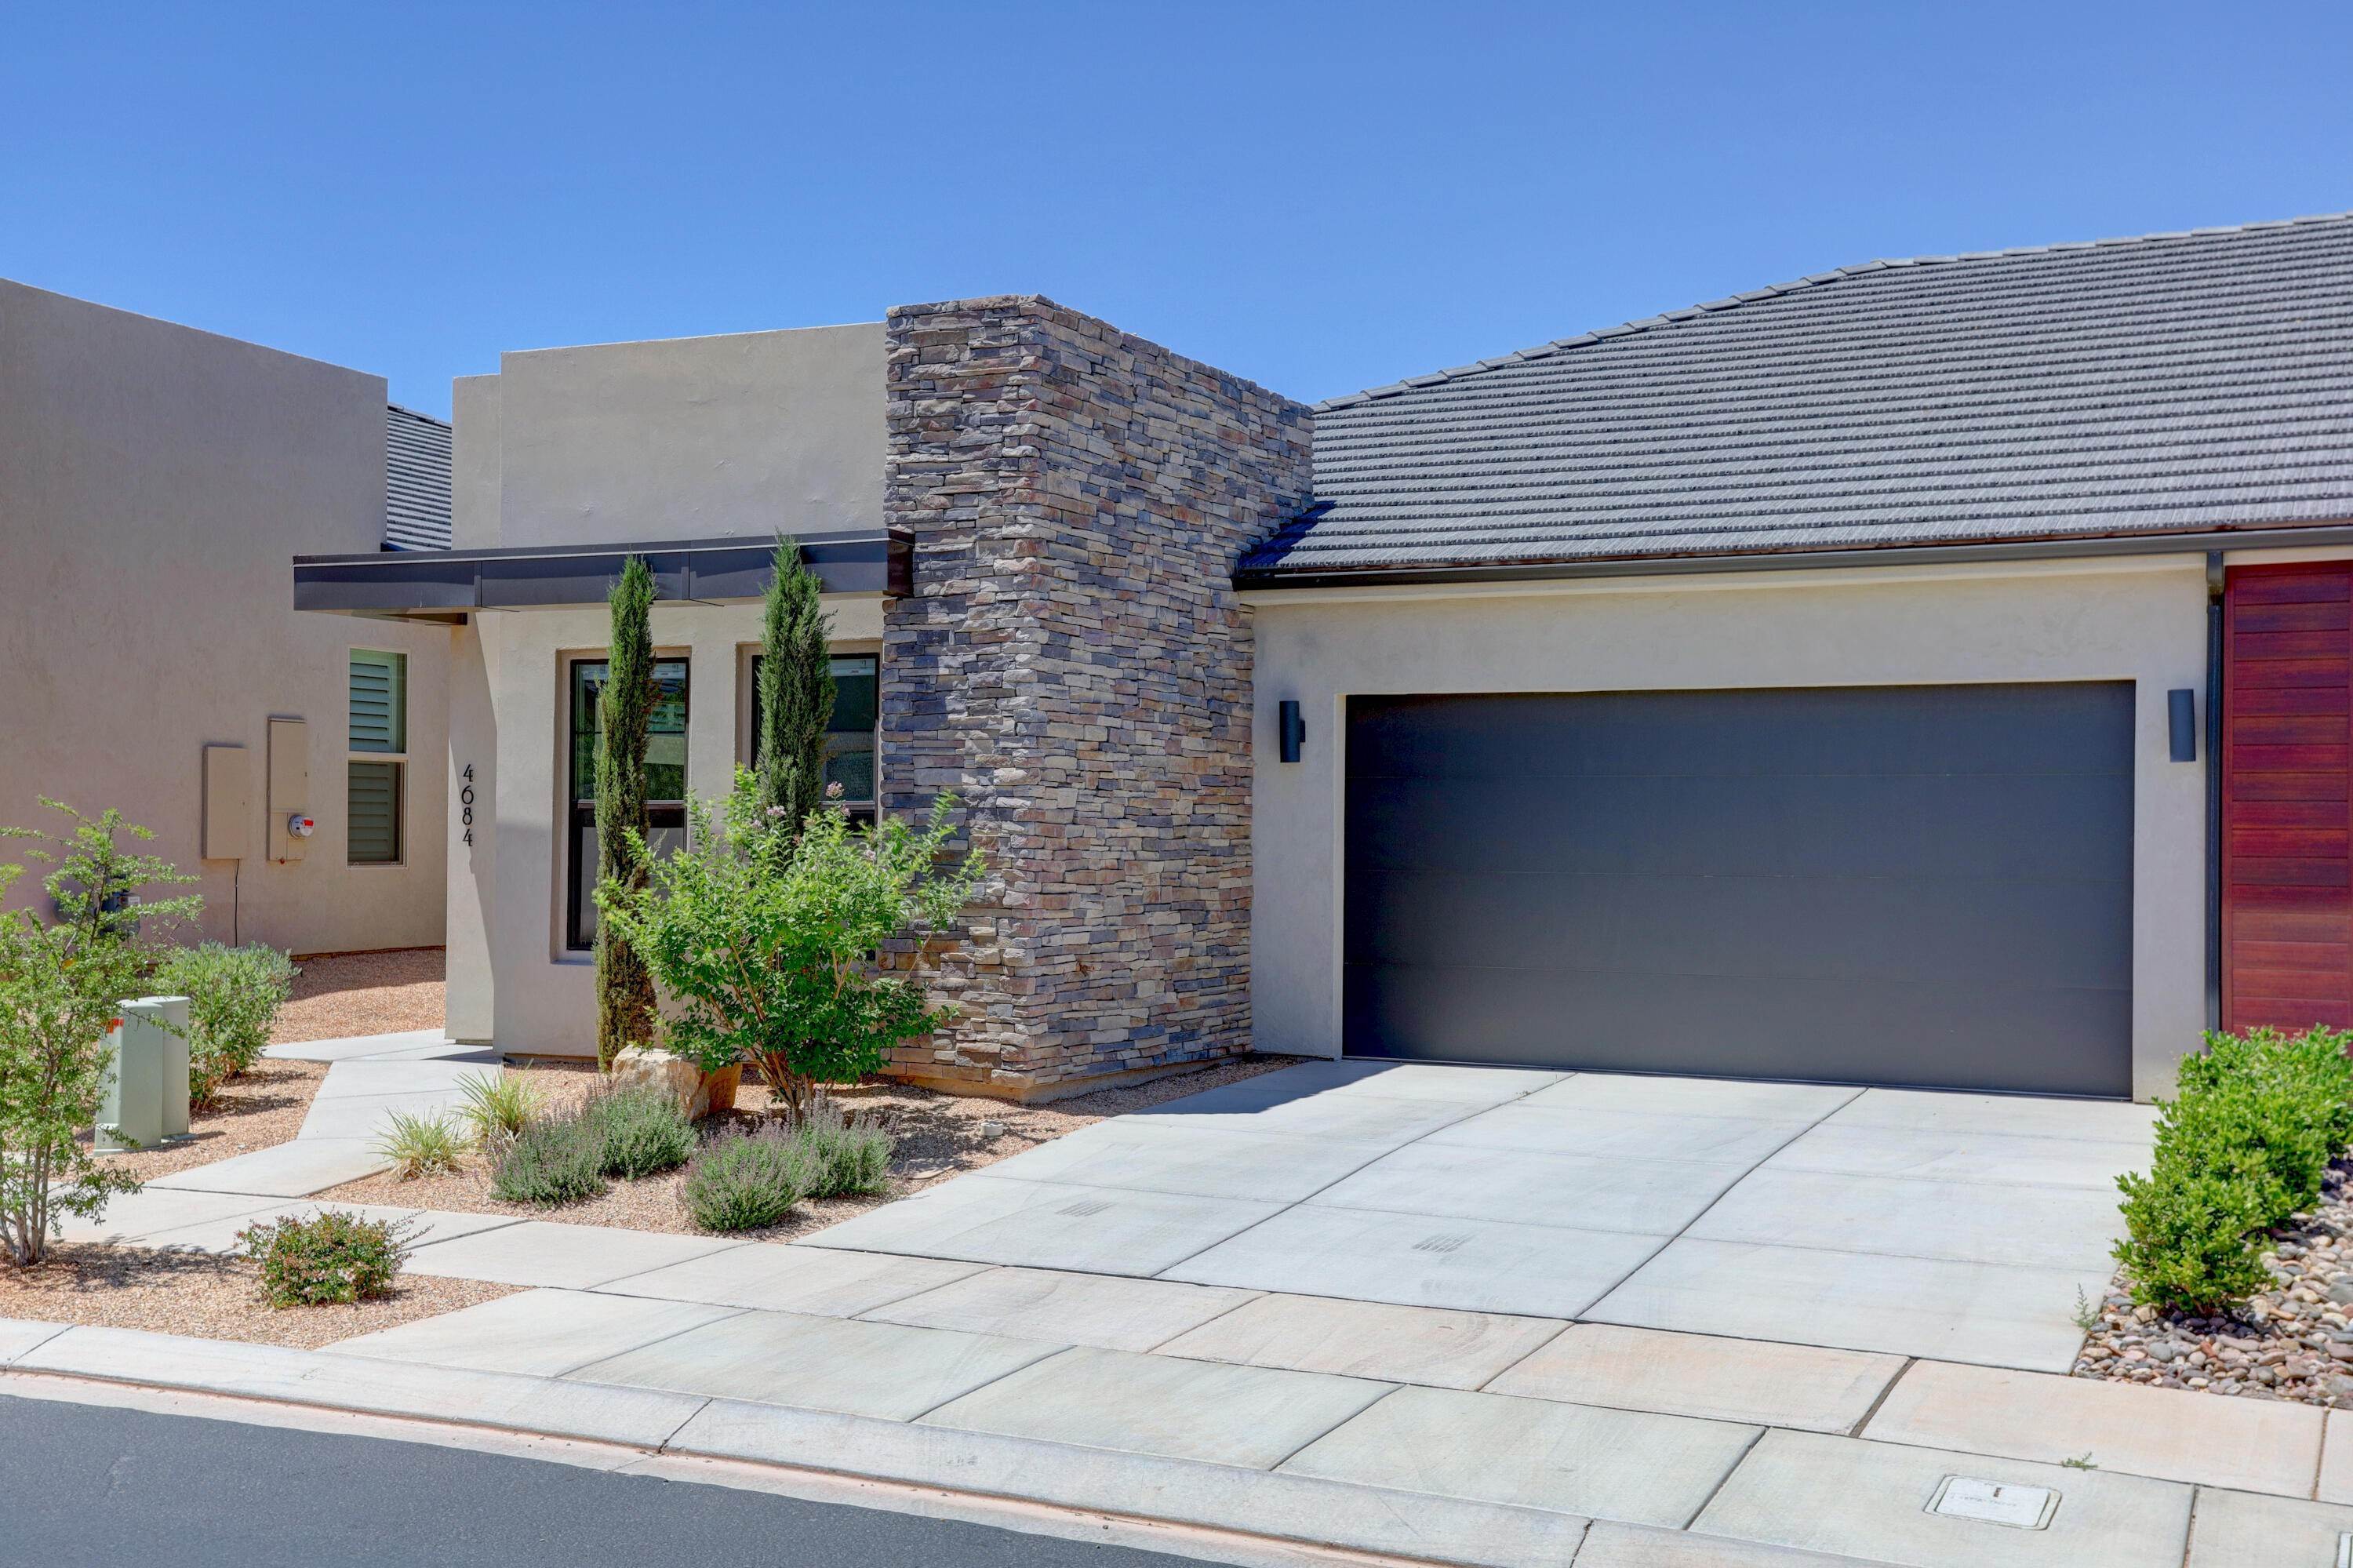 Property for Sale at 4684 Martin Drive St. George, Utah 84790 United States